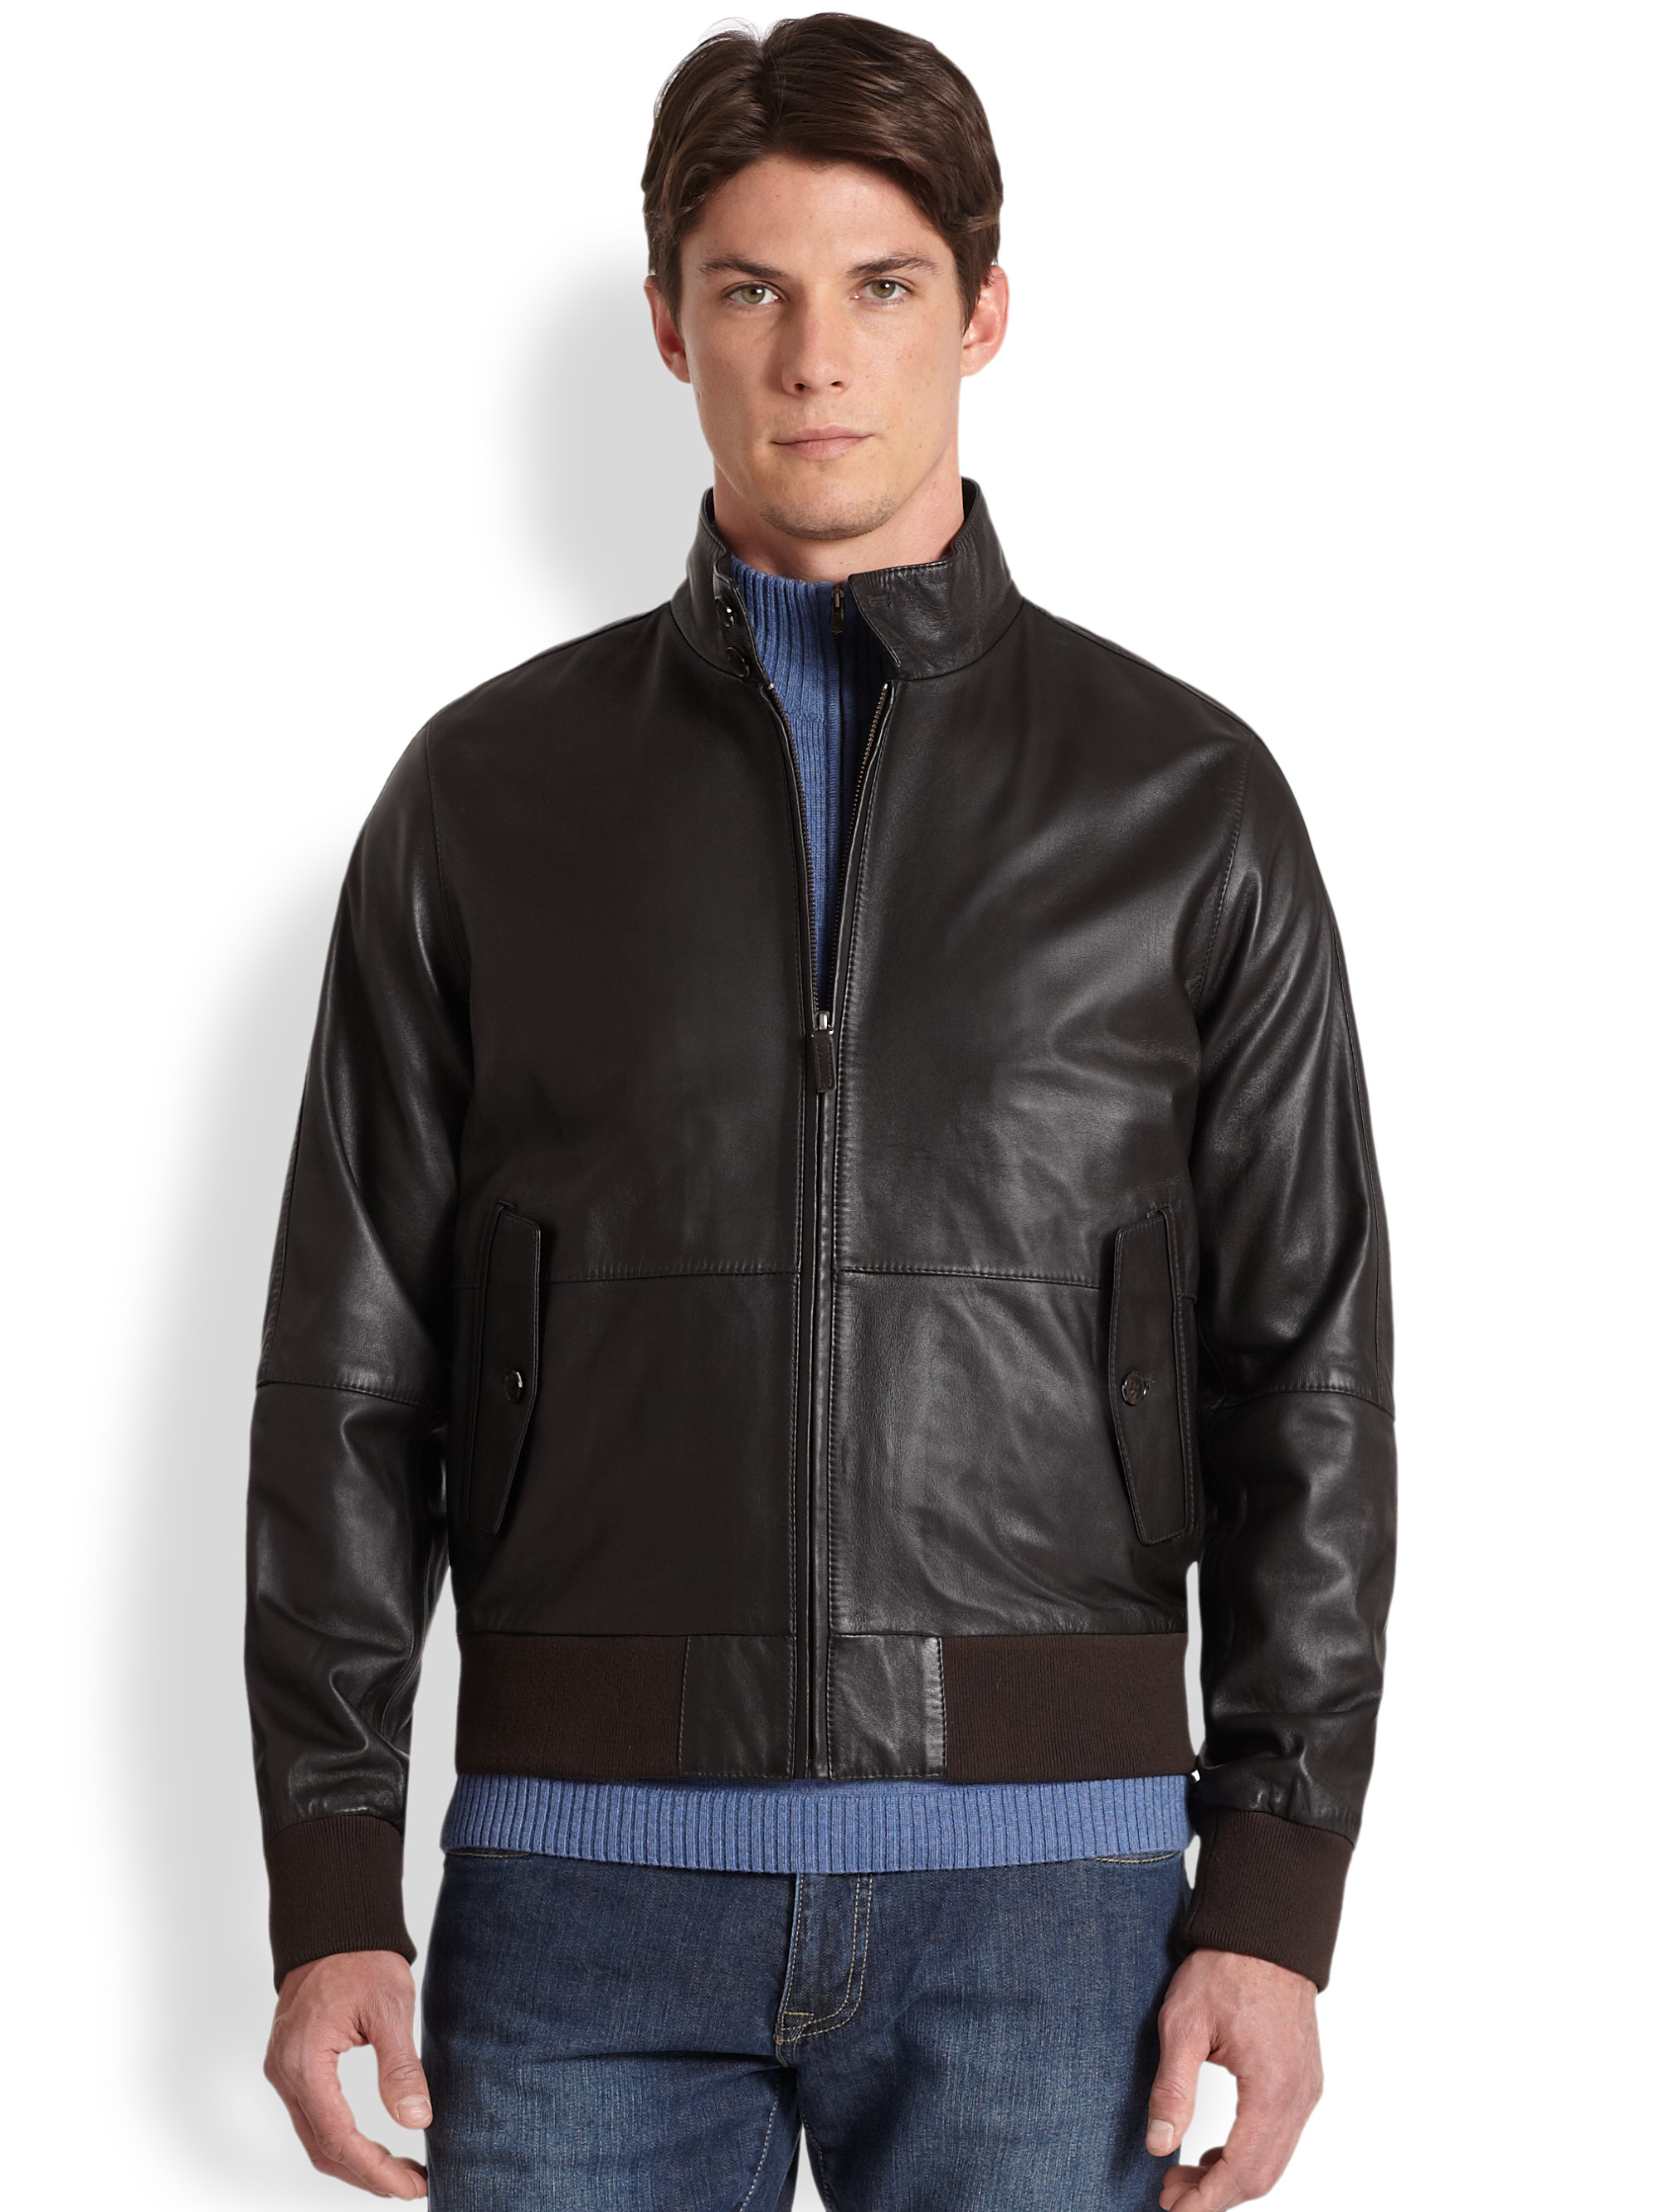 Similiar Men's Leather Bombers Jackets Browns Keywords